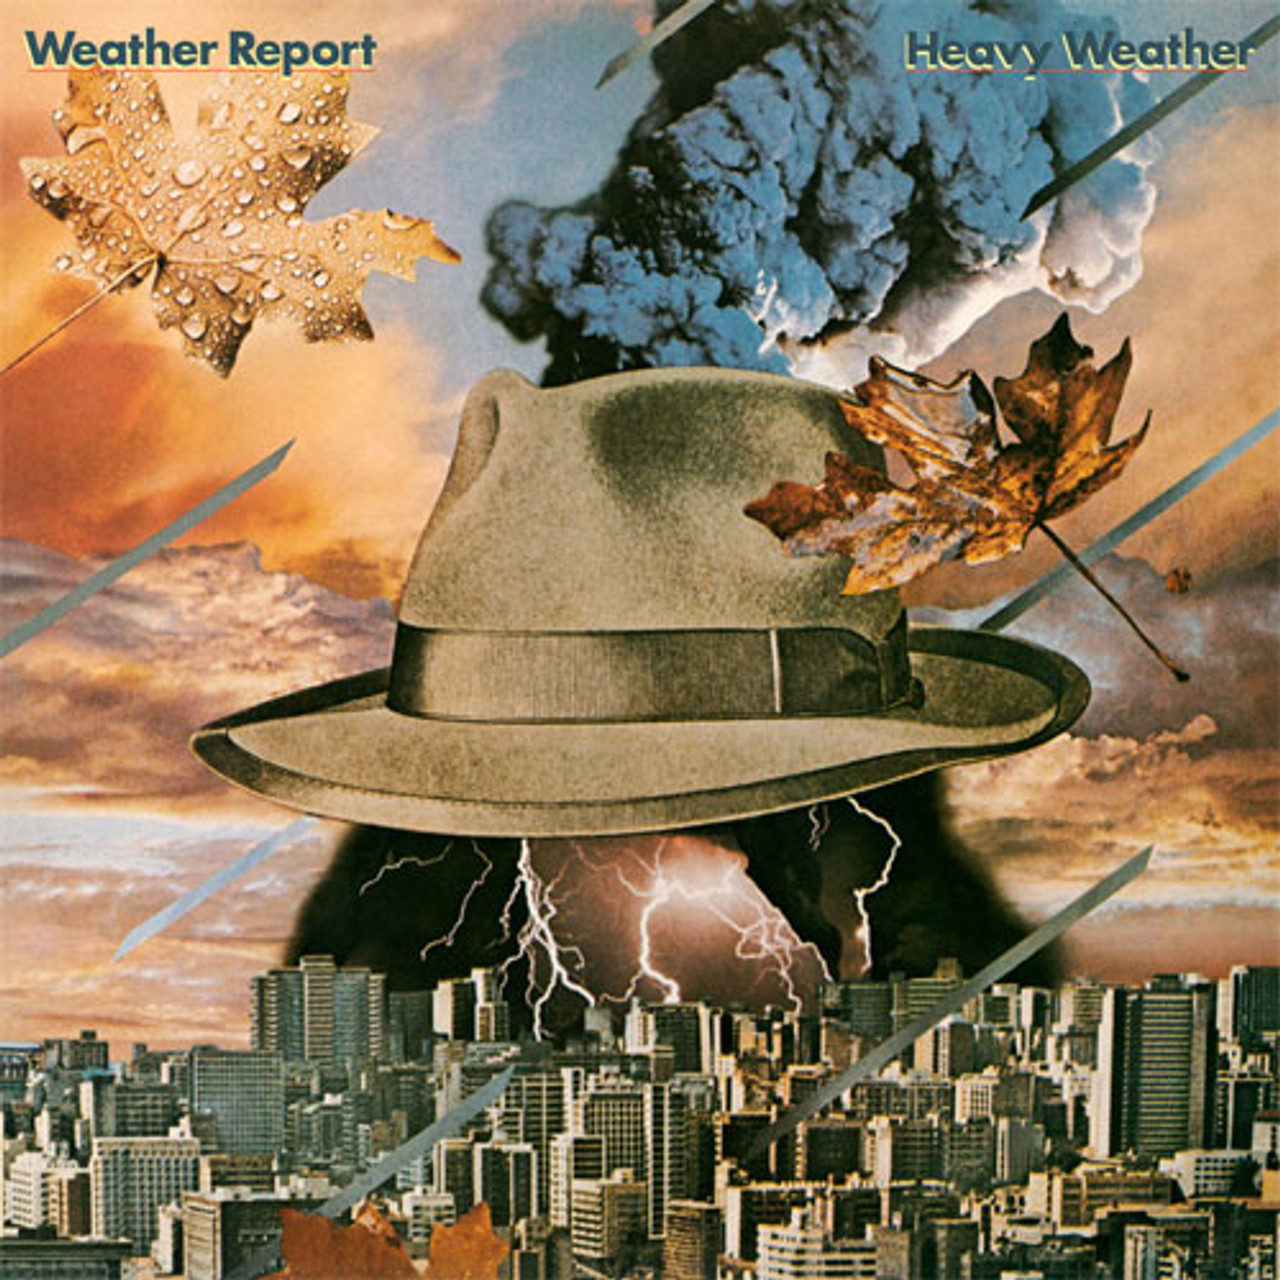 The Weather Report Heavy 180g Weather LP